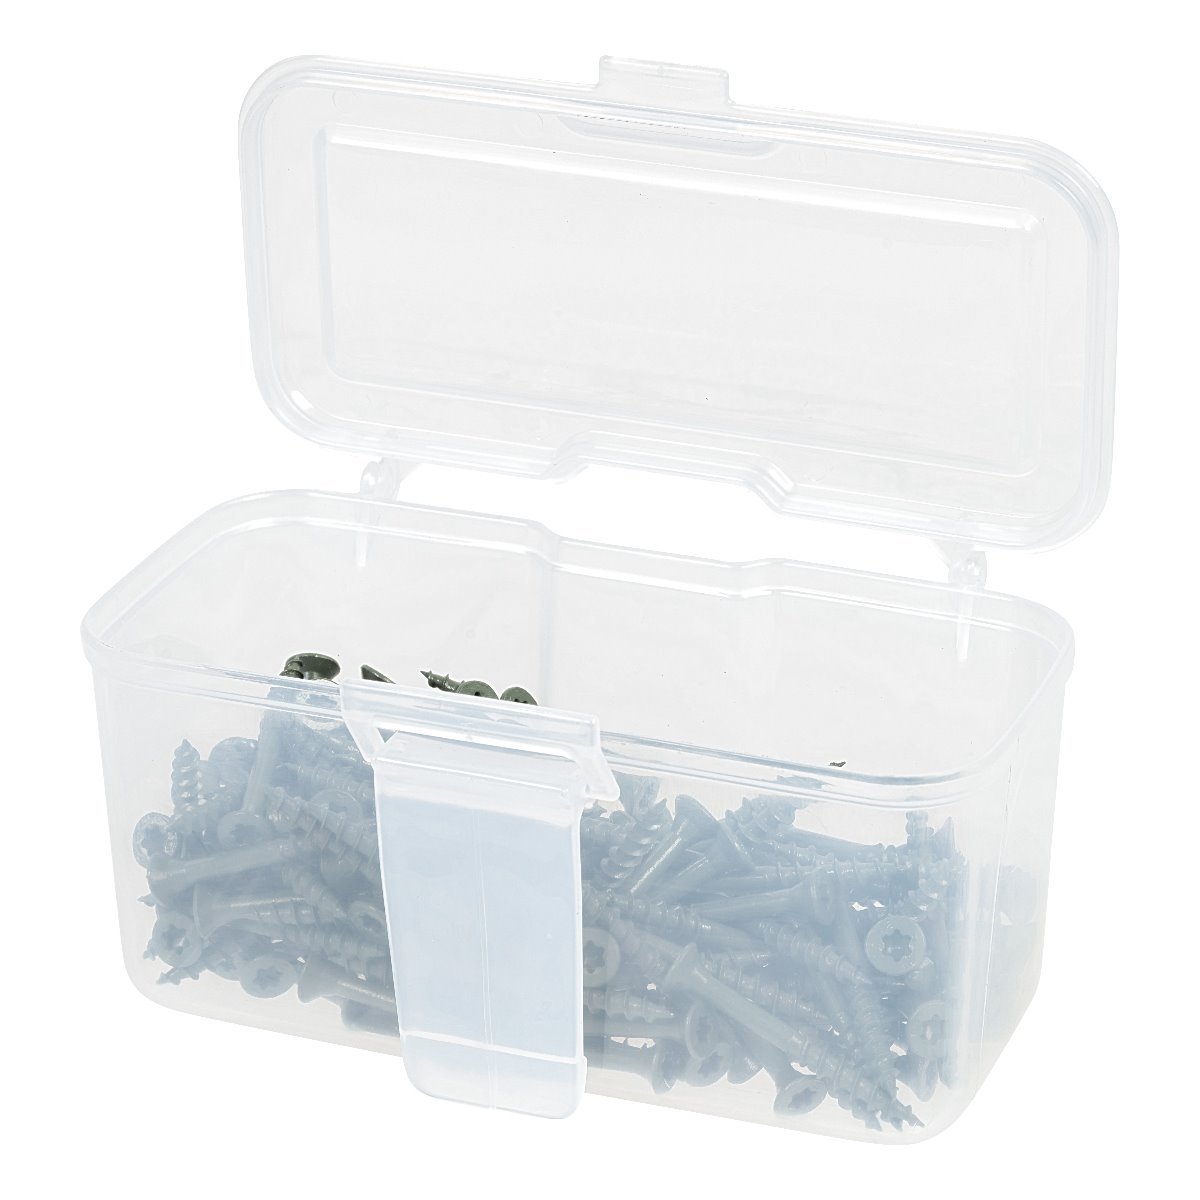 Portable Project Case - 6-inch x 6-inch